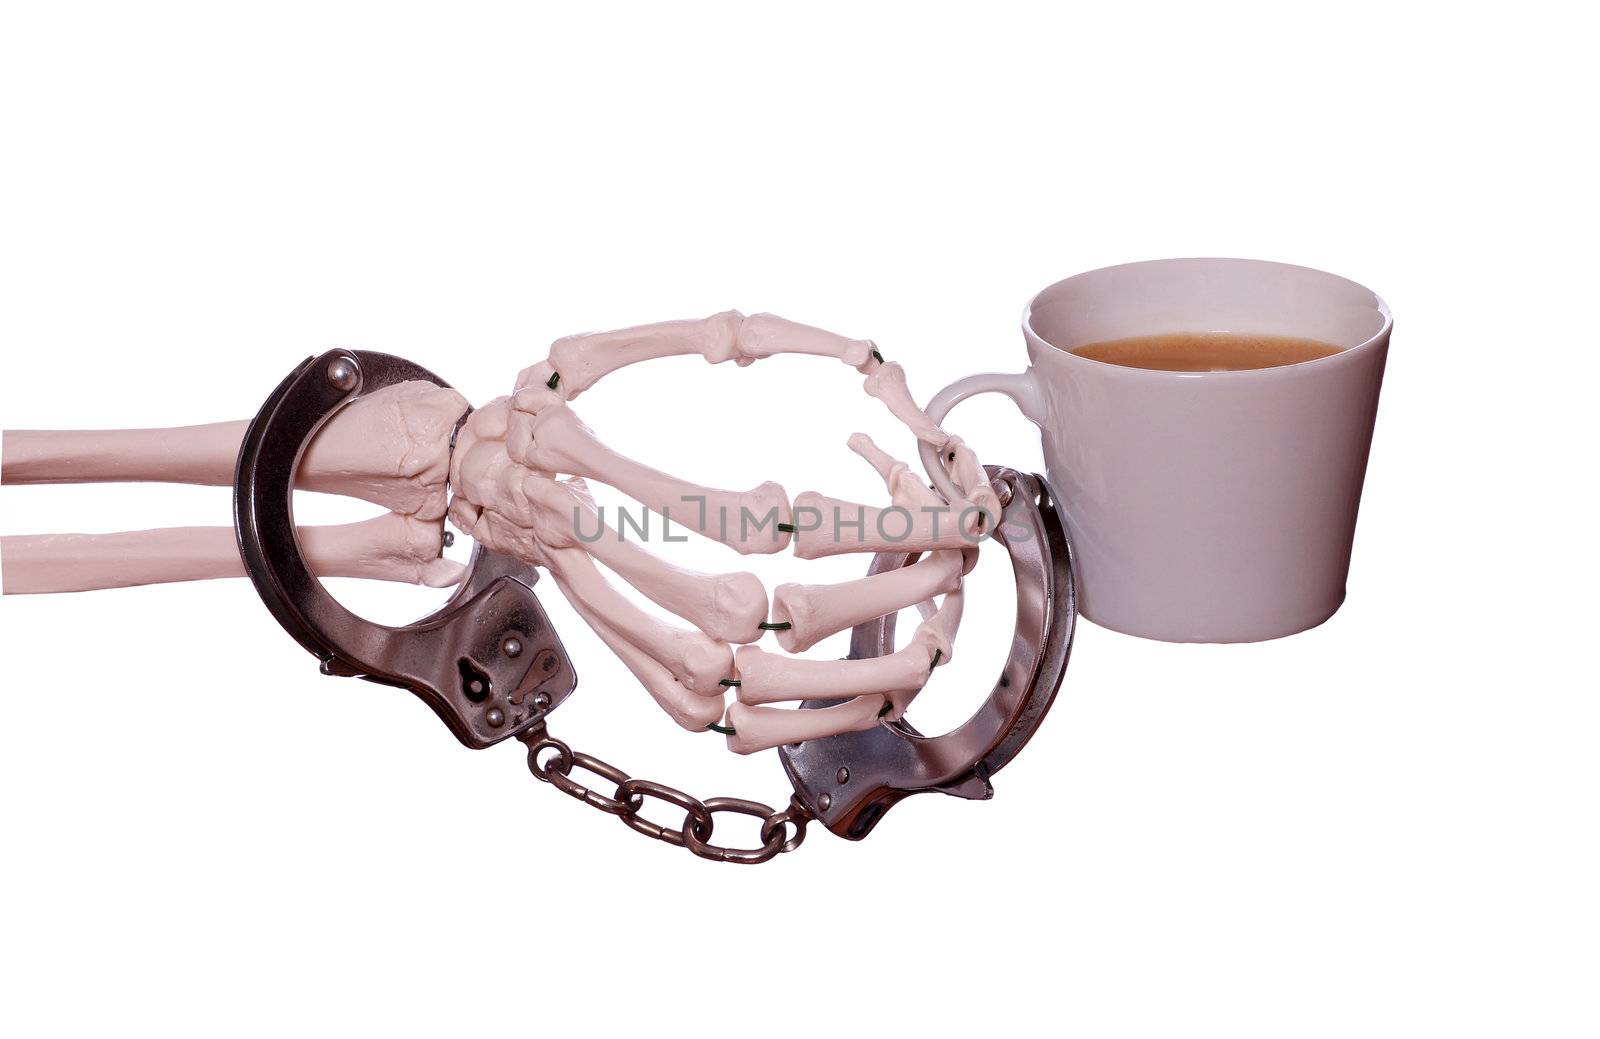 captured coffee with handcuff on skeleton hand